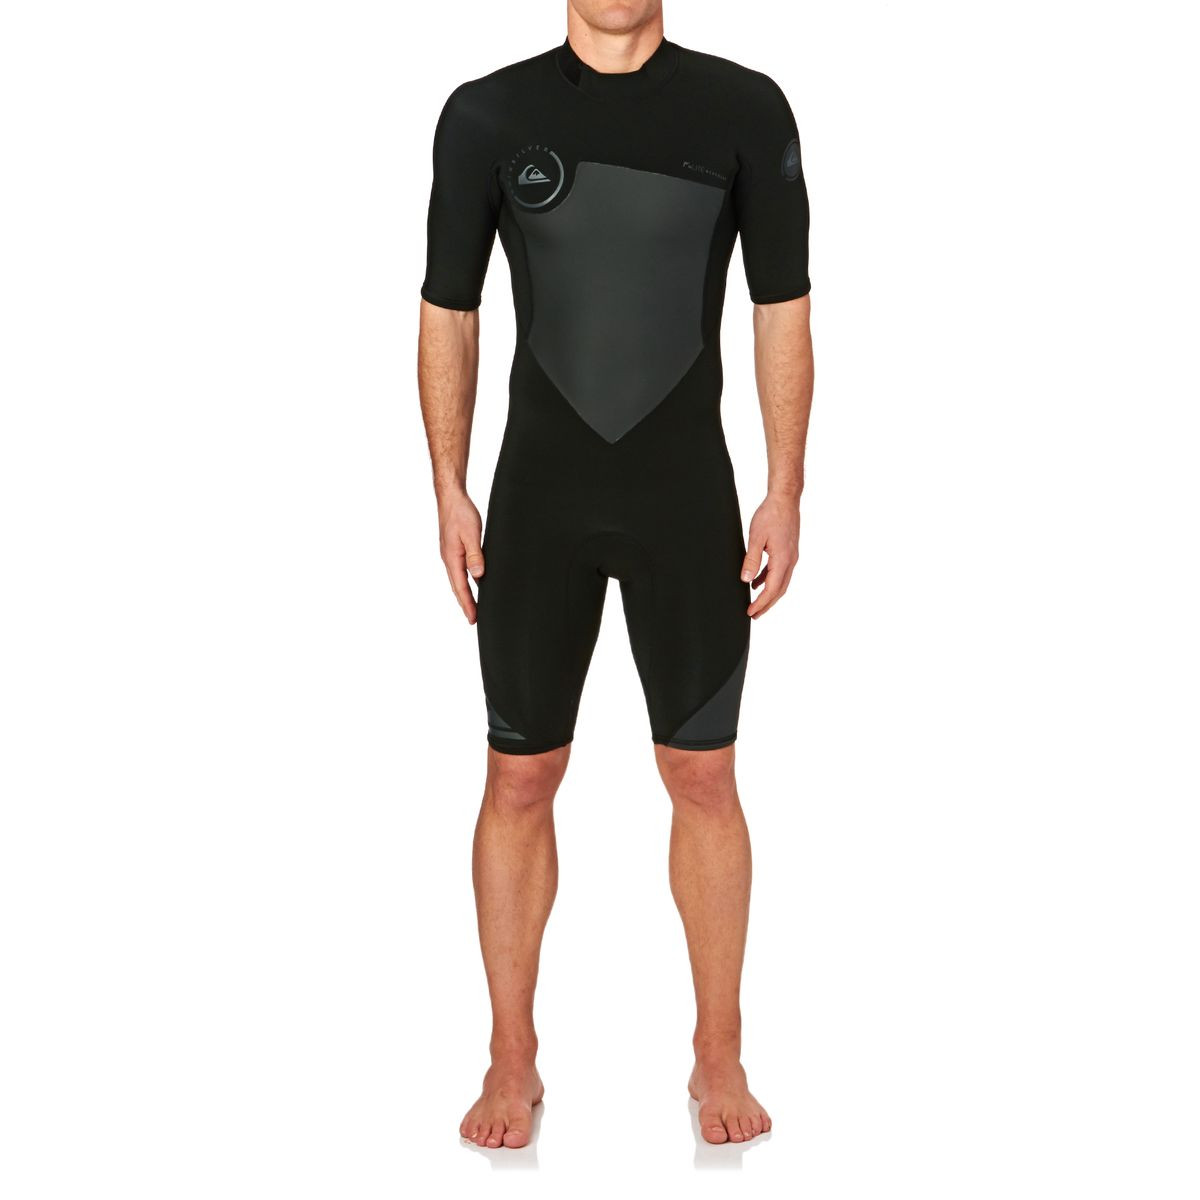 Quiksilver Syncro 2mm 2017 Back Zip Short Sleeve Shorty Wetsuit - Black